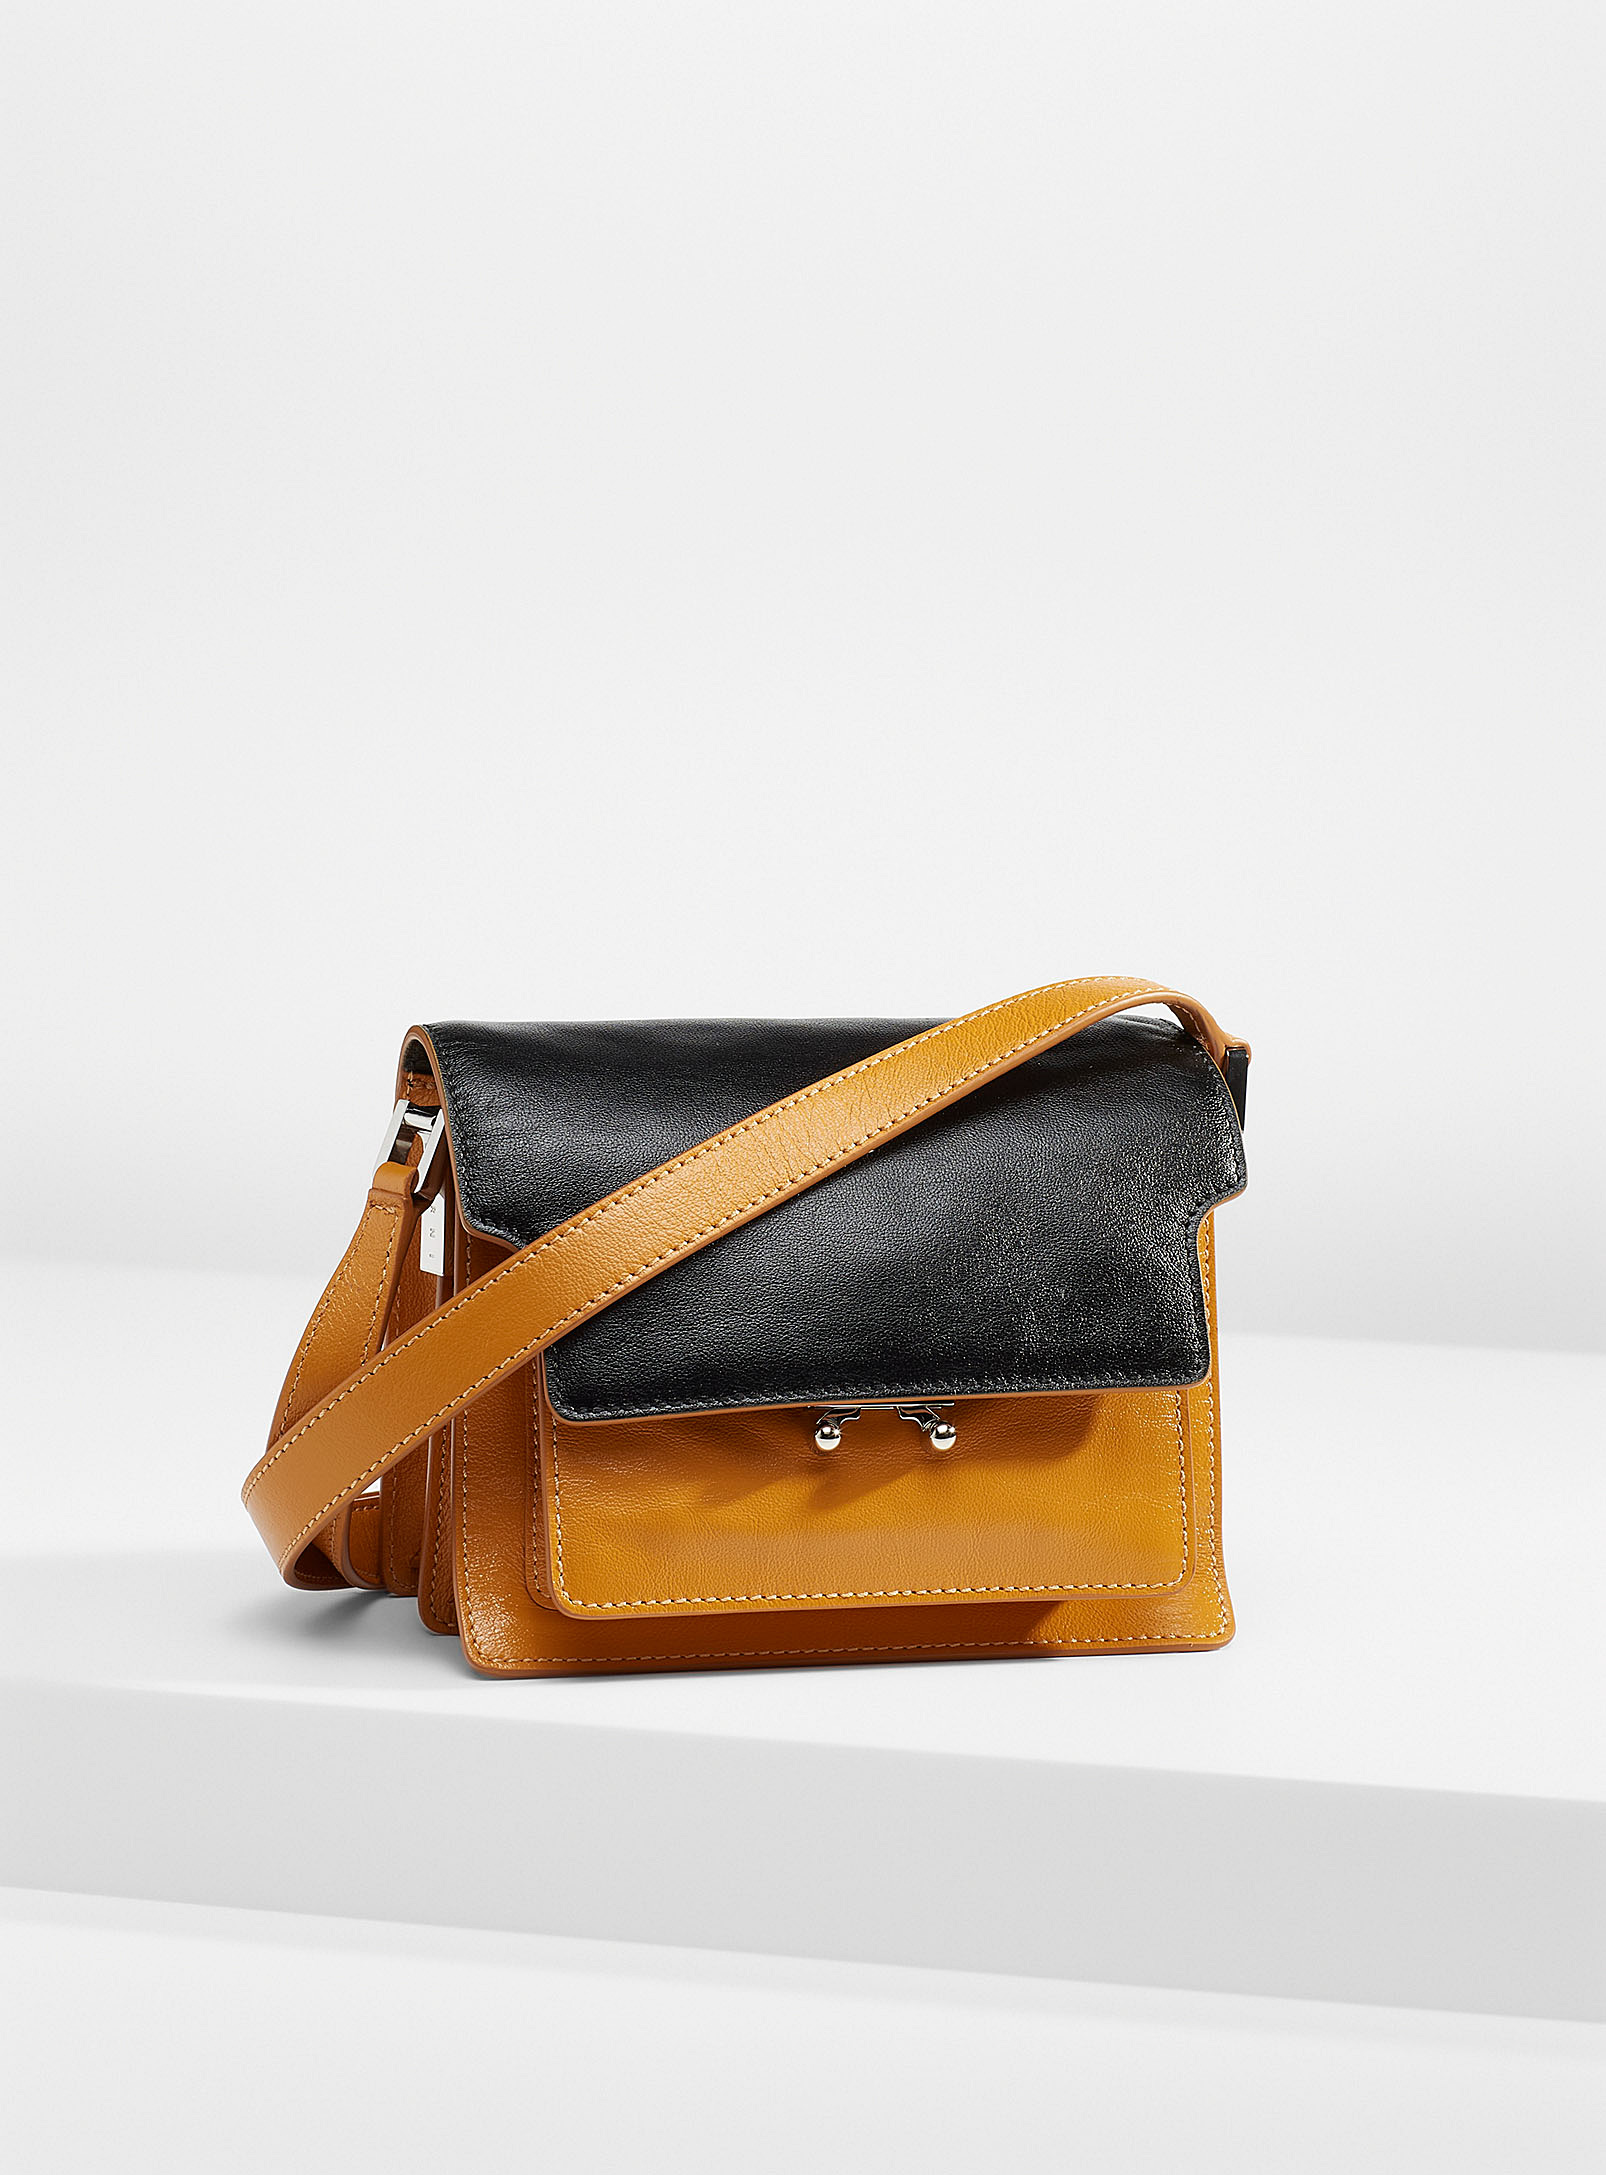 Trunk Soft E W Leather Shoulder Bag in Brown - Marni